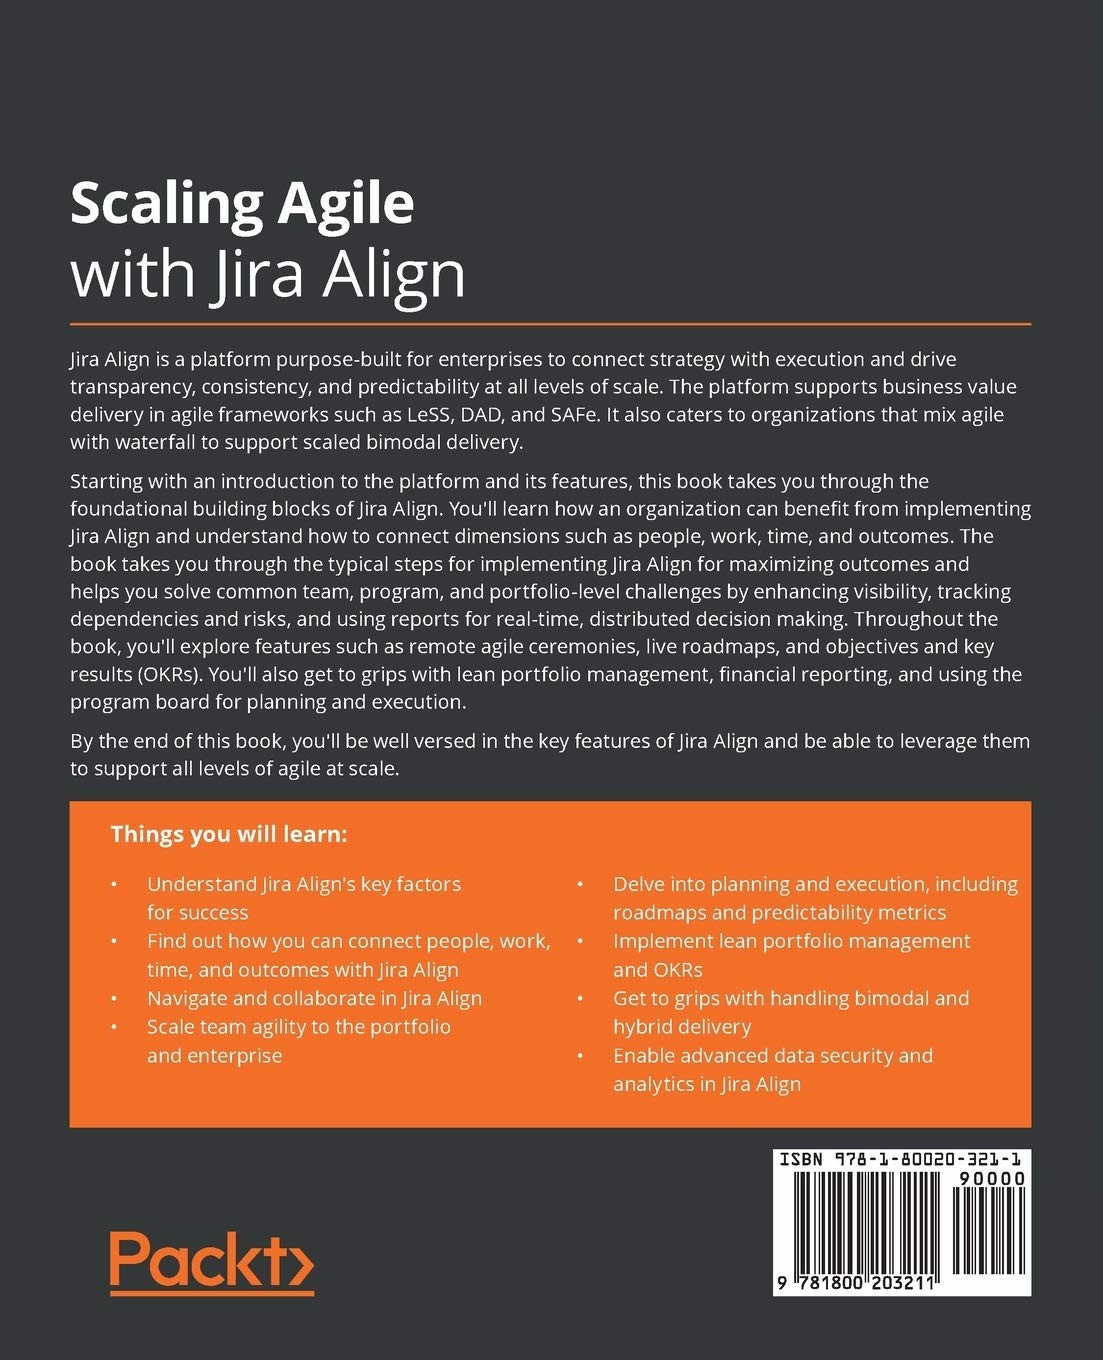 Scaling Agile with Jira Align